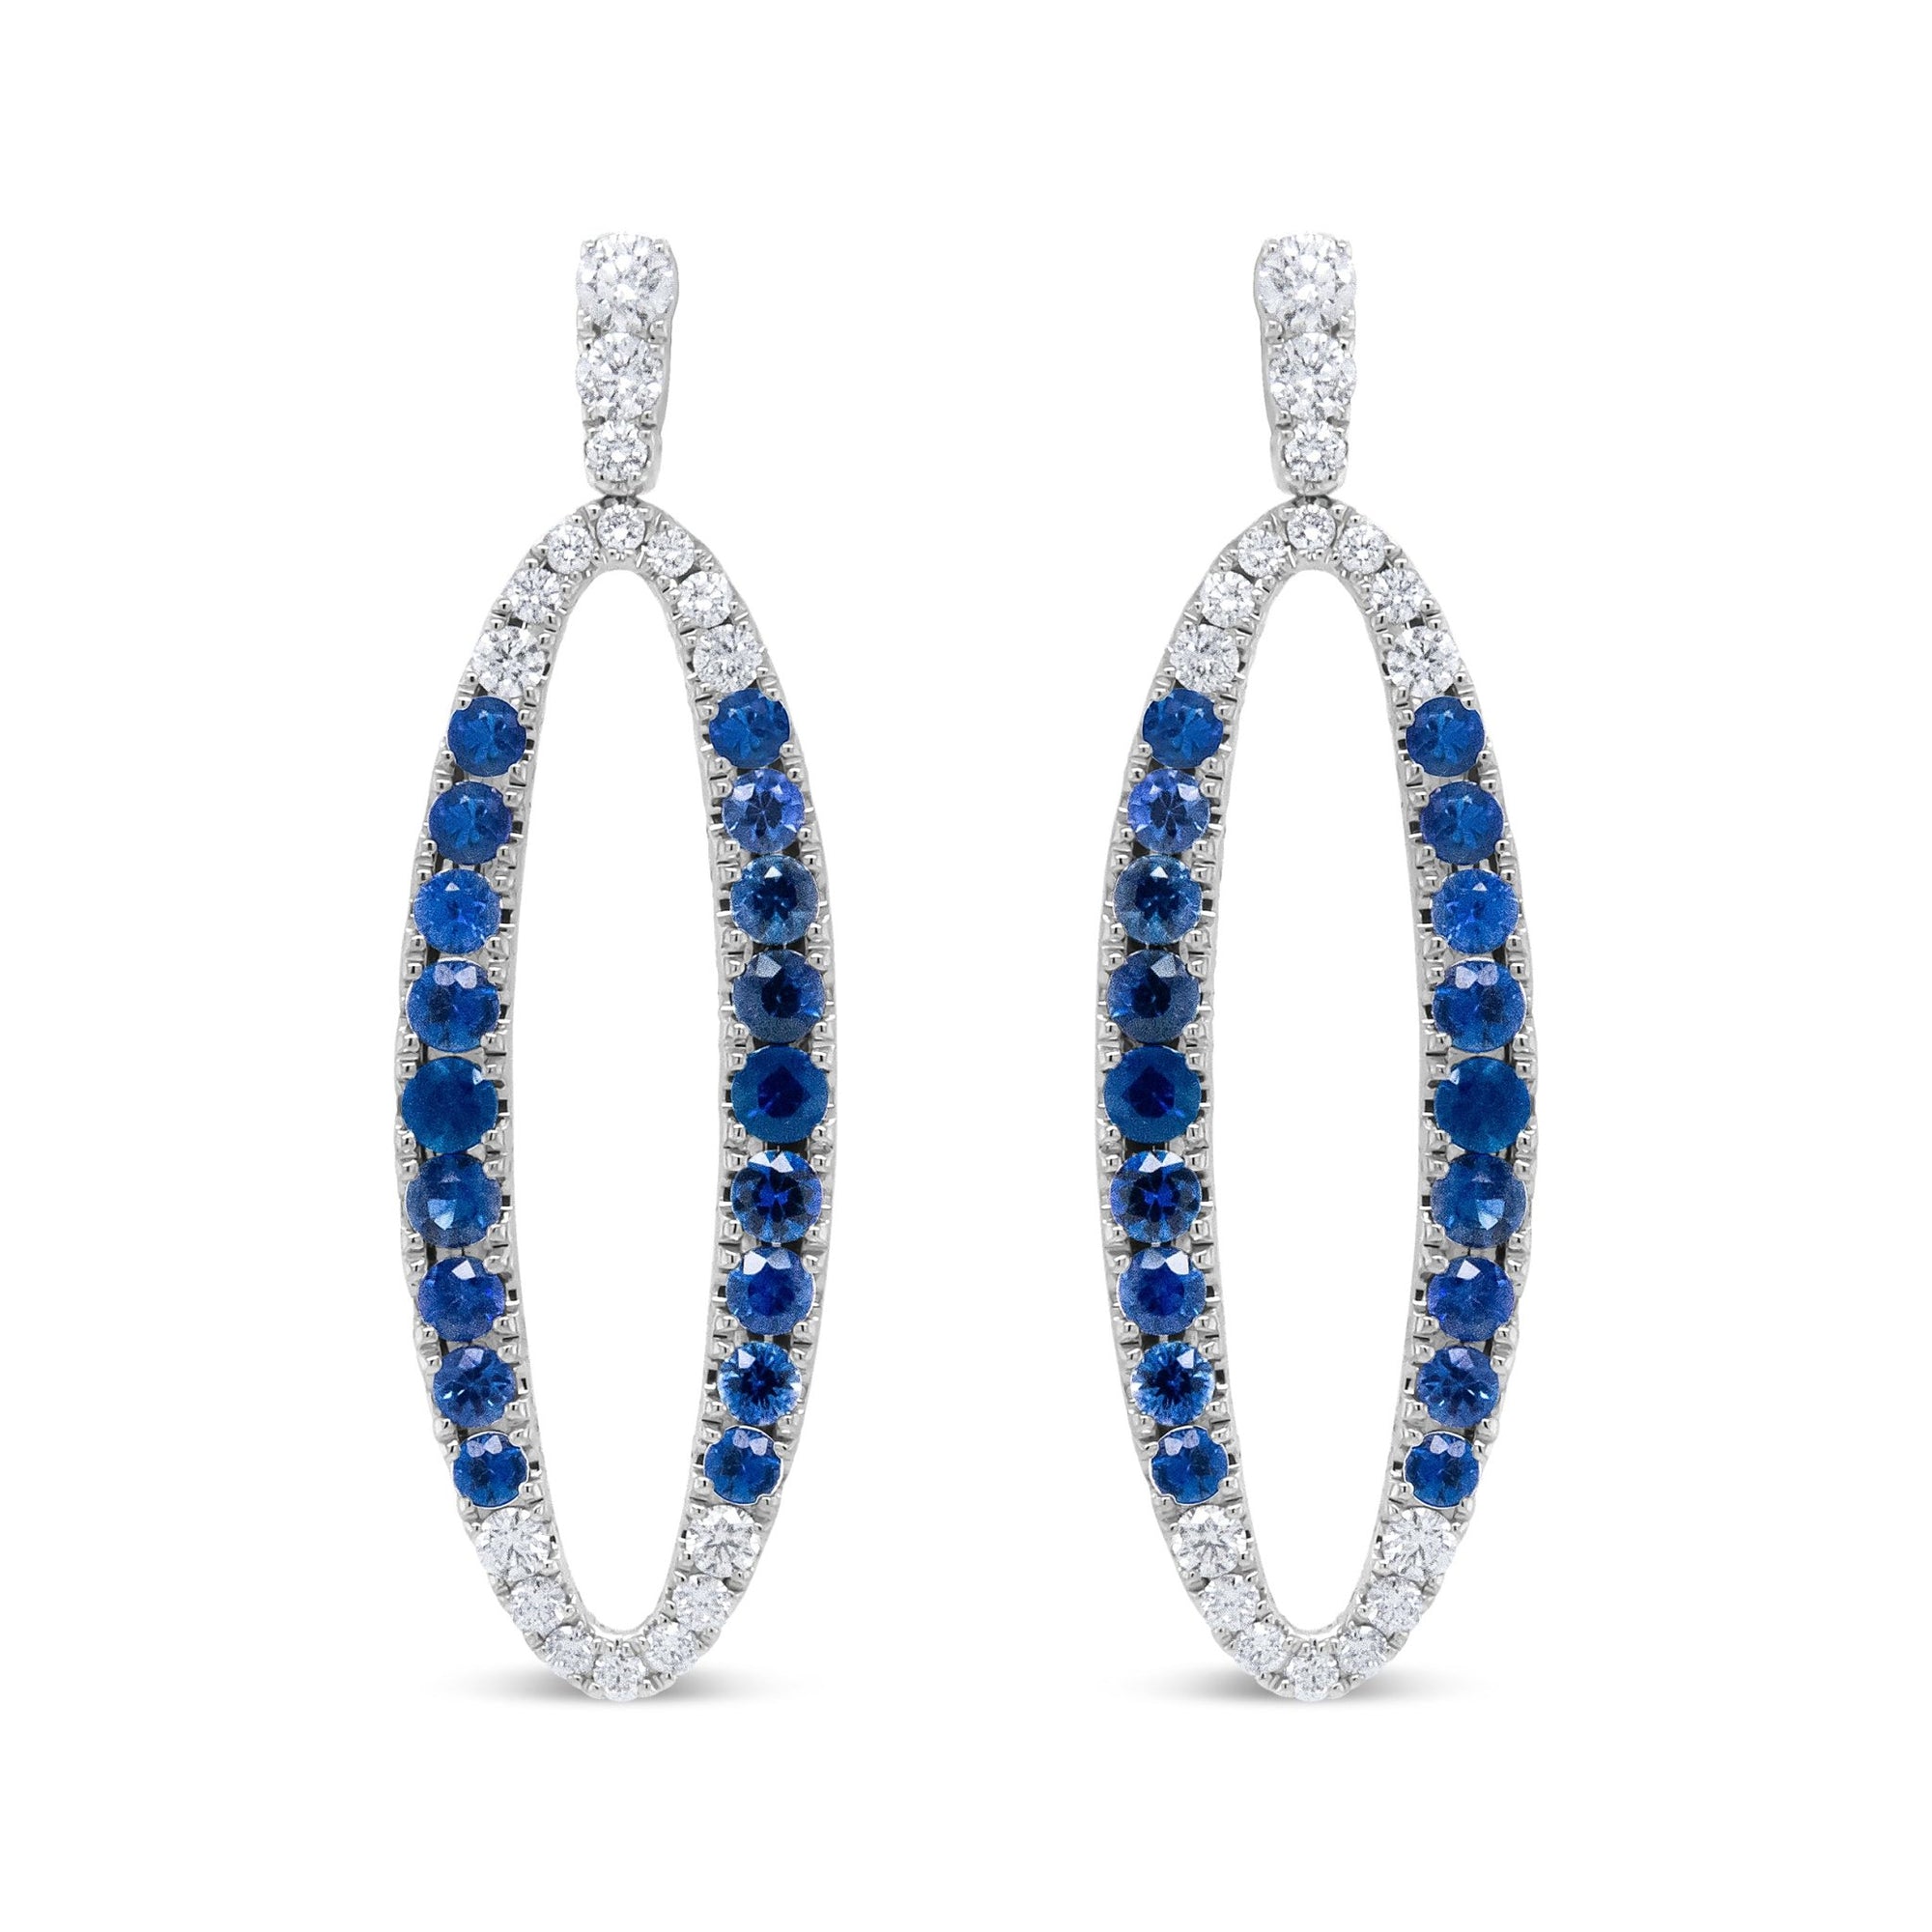 18K White Gold 1.11 Cttw Blue Round Diamond and Blue Sapphire Openwork Oval Shaped Dangle Earrings (F-G Color, VS1-VS2 Clarity) - LinkagejewelrydesignLinkagejewelrydesign